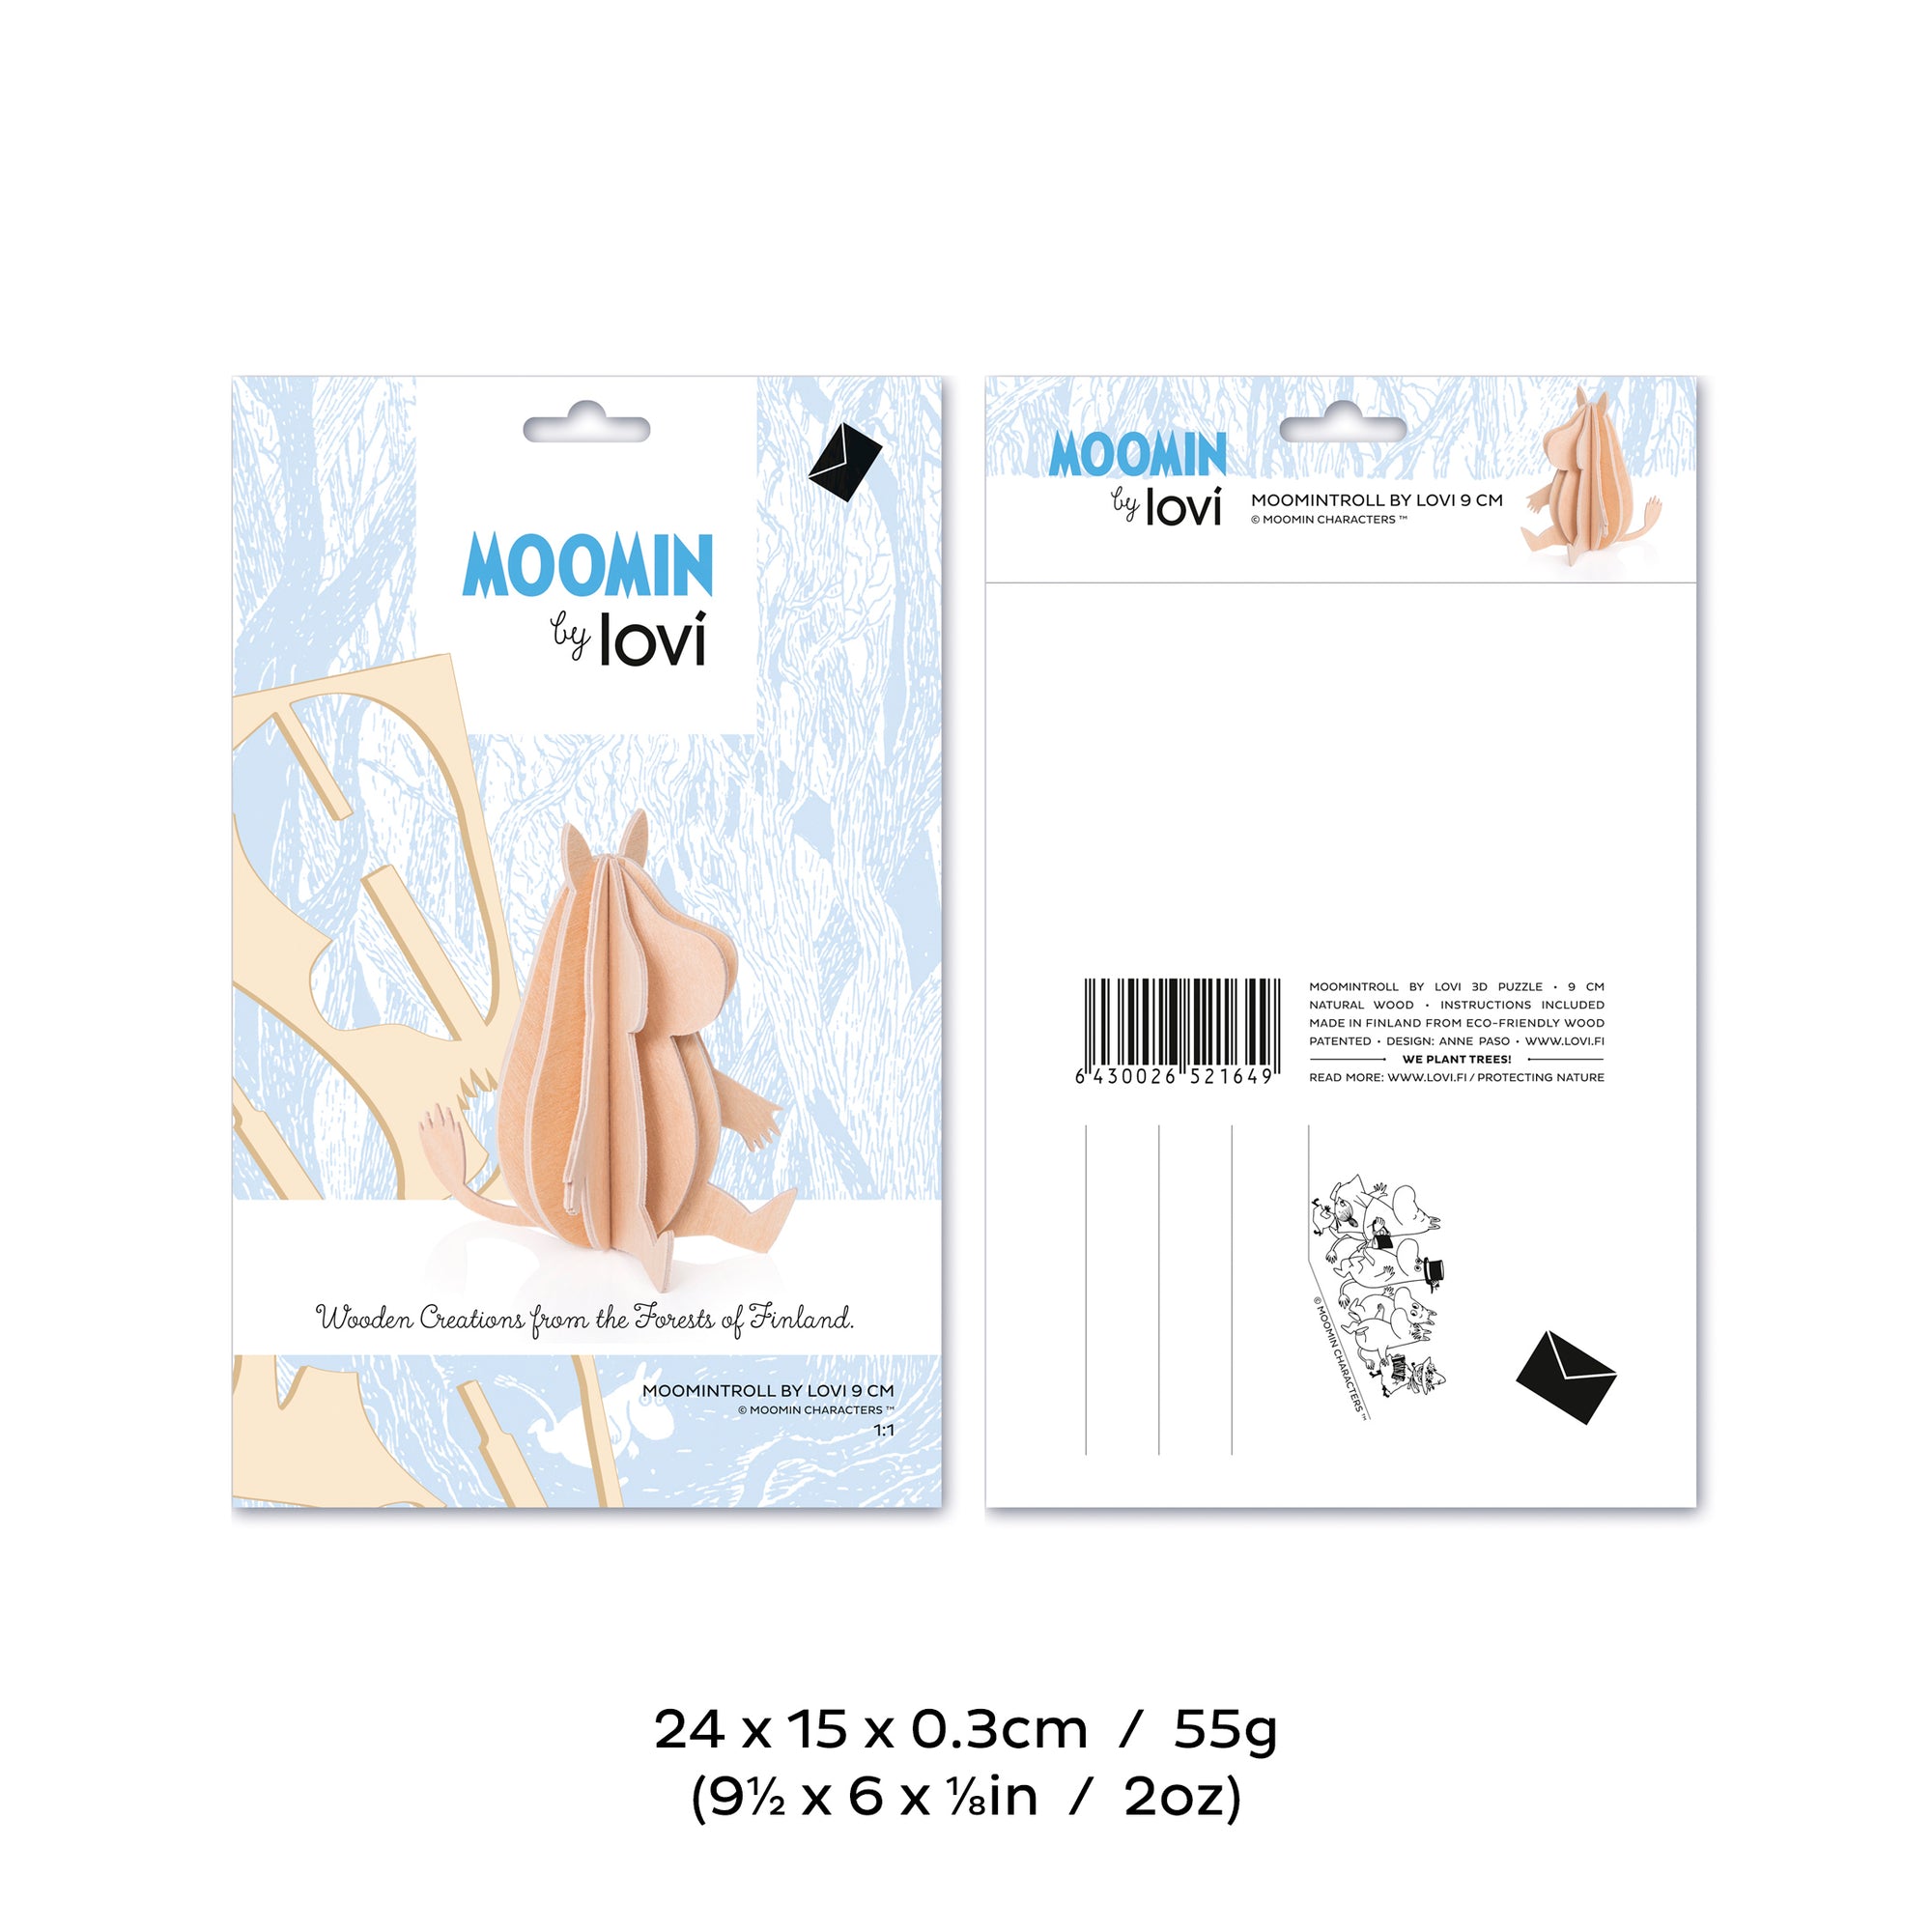 Moomintroll by Lovi is a woodland 3D puzzle, assembled, it is 3 1/2”.  Moomintroll is the first character from the Moomin book series written by Finnish author Tove Jansson in the 1940’s and 1950’s. 